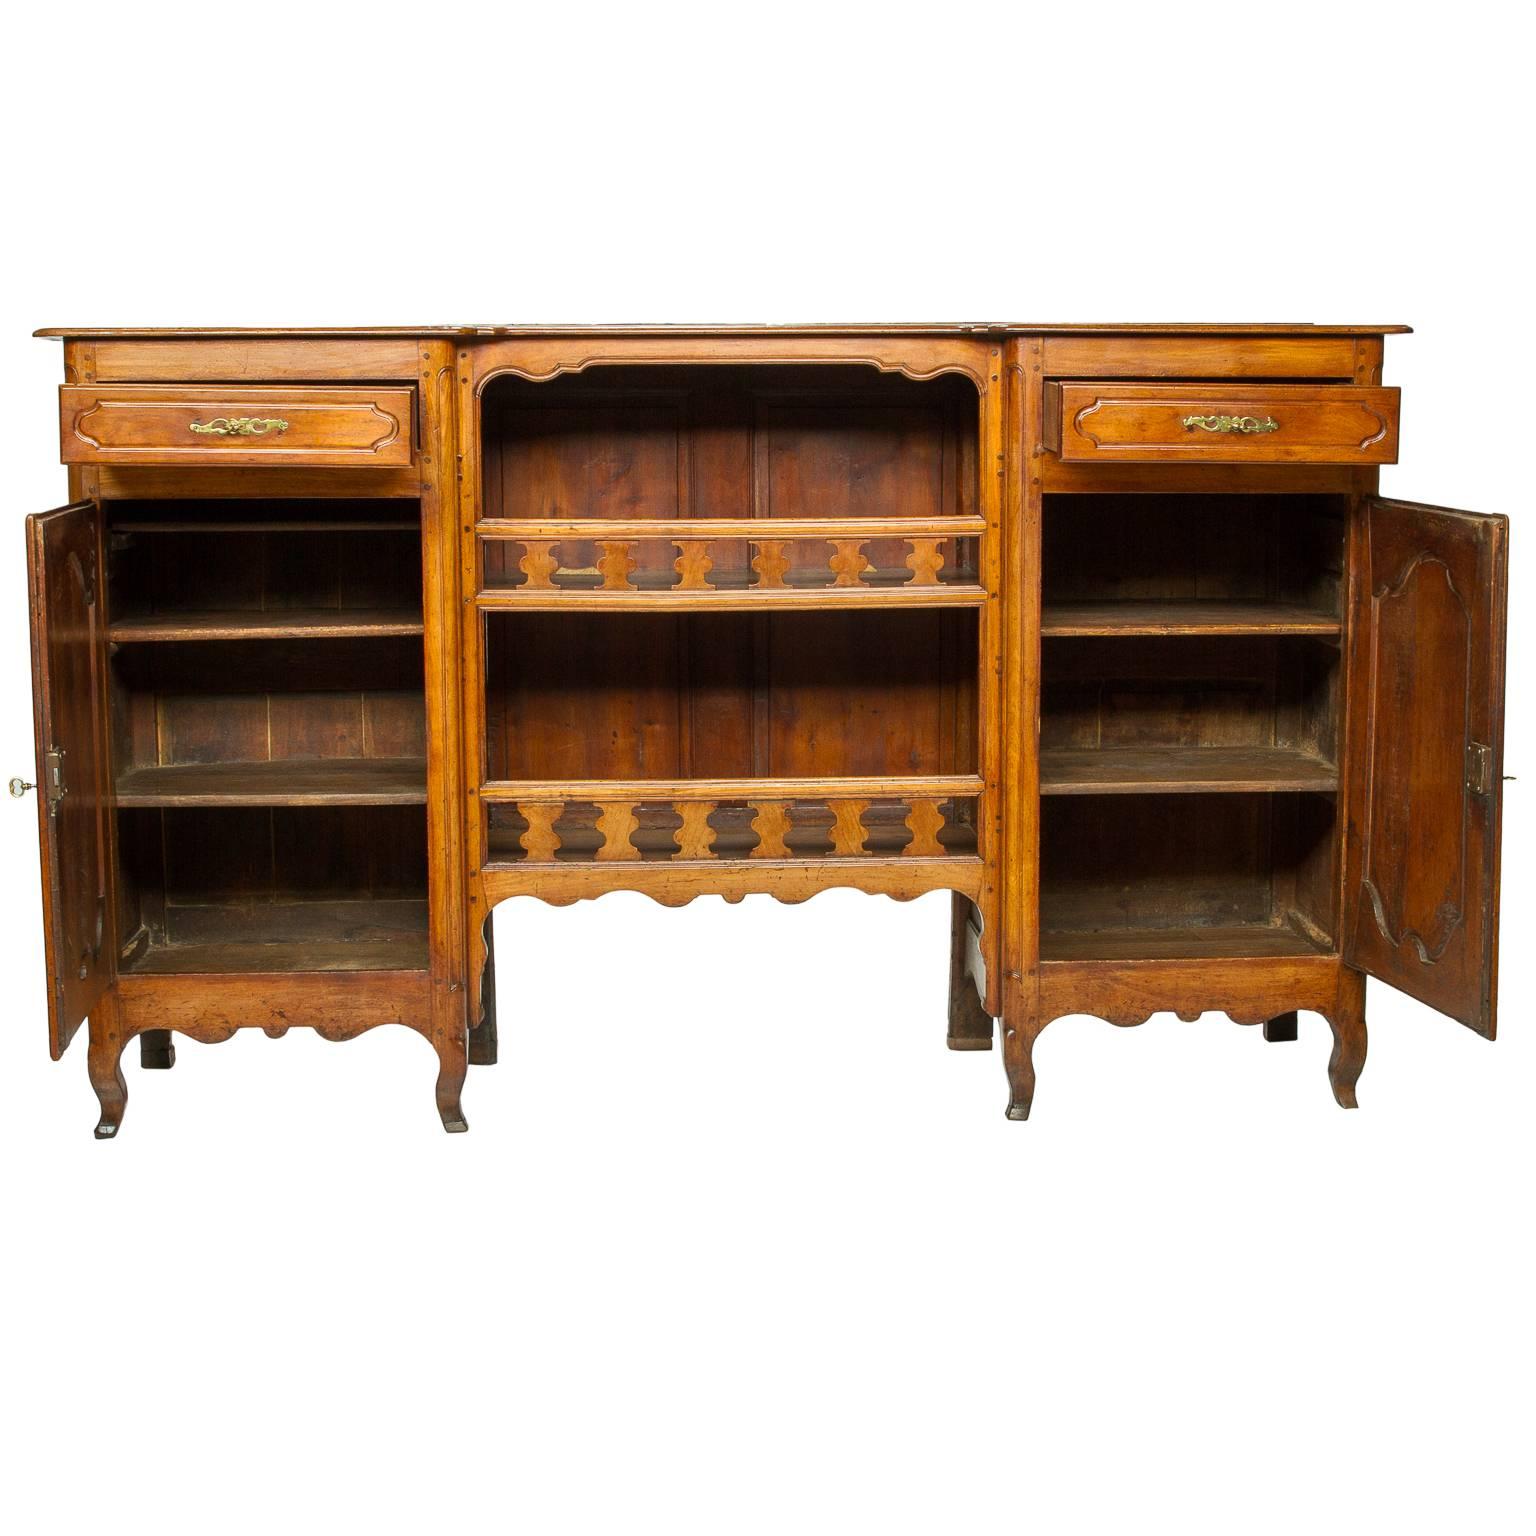 Antique steage Picardie made from quality french cherrywood and rubbed to a swanky glow. The style Provincial Louis XV. A seage picardie is a rare and useful piece of furniture. Looking at the piece you notice the break in the front. You have two